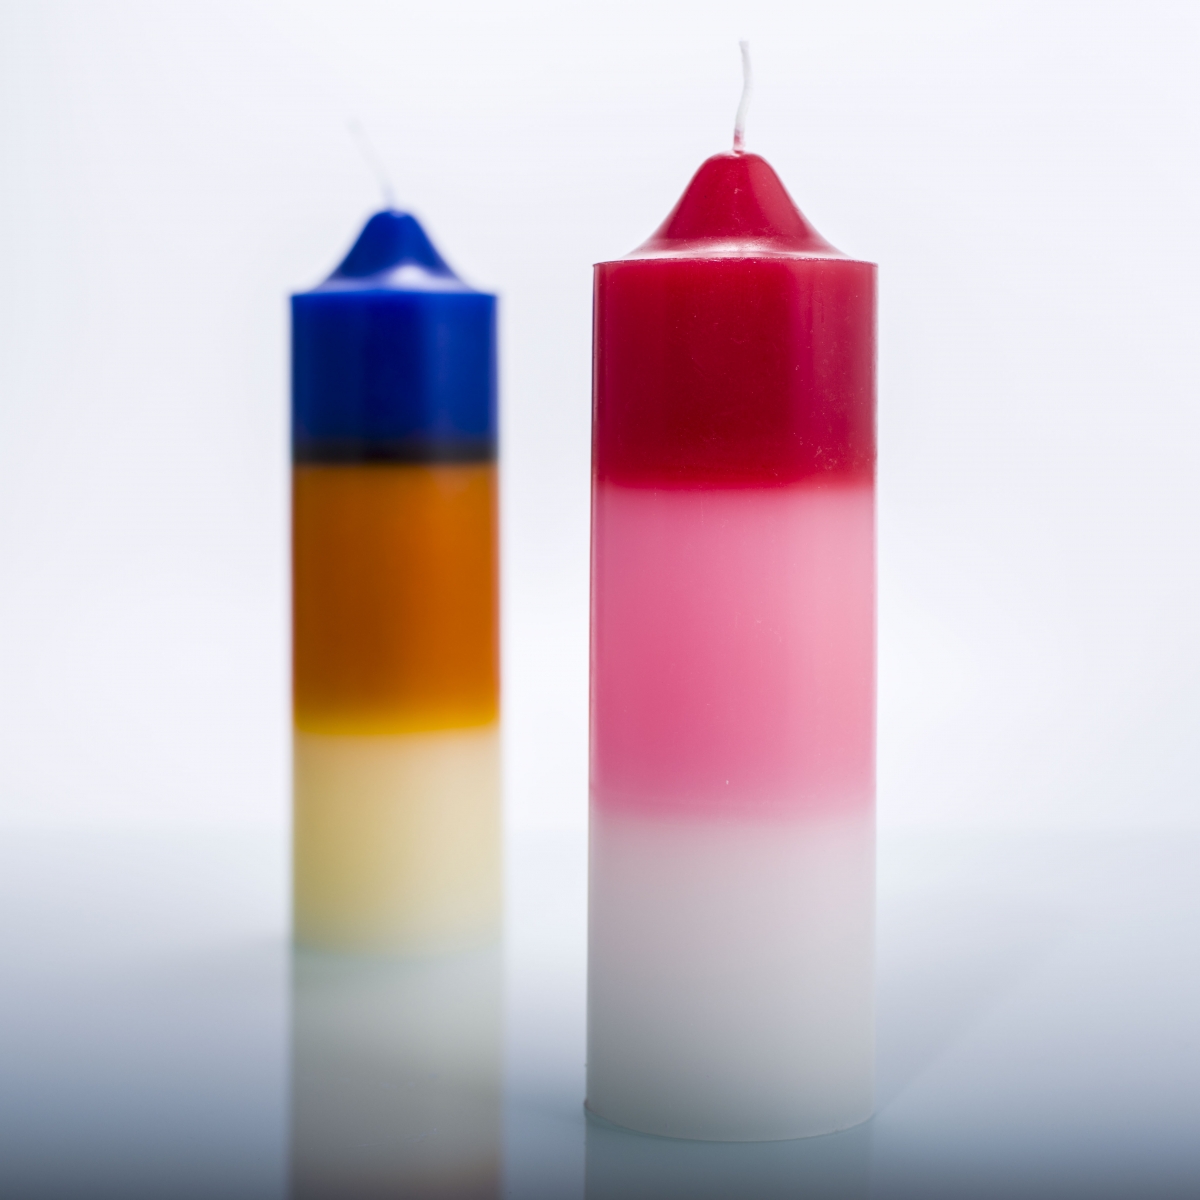 Pillar Candles：Rainbow Color ,Multi Layer Colorful, Big Candle Centerpiece, China Factory,Cheap Price-HOWCANDLE-Candles,Scented Candles,Aromatherapy Candles,Soy Candles,Vegan Candles,Jar Candles,Pillar Candles,Candle Gift Sets,Essential Oils,Reed Diffuser,Candle Holder,